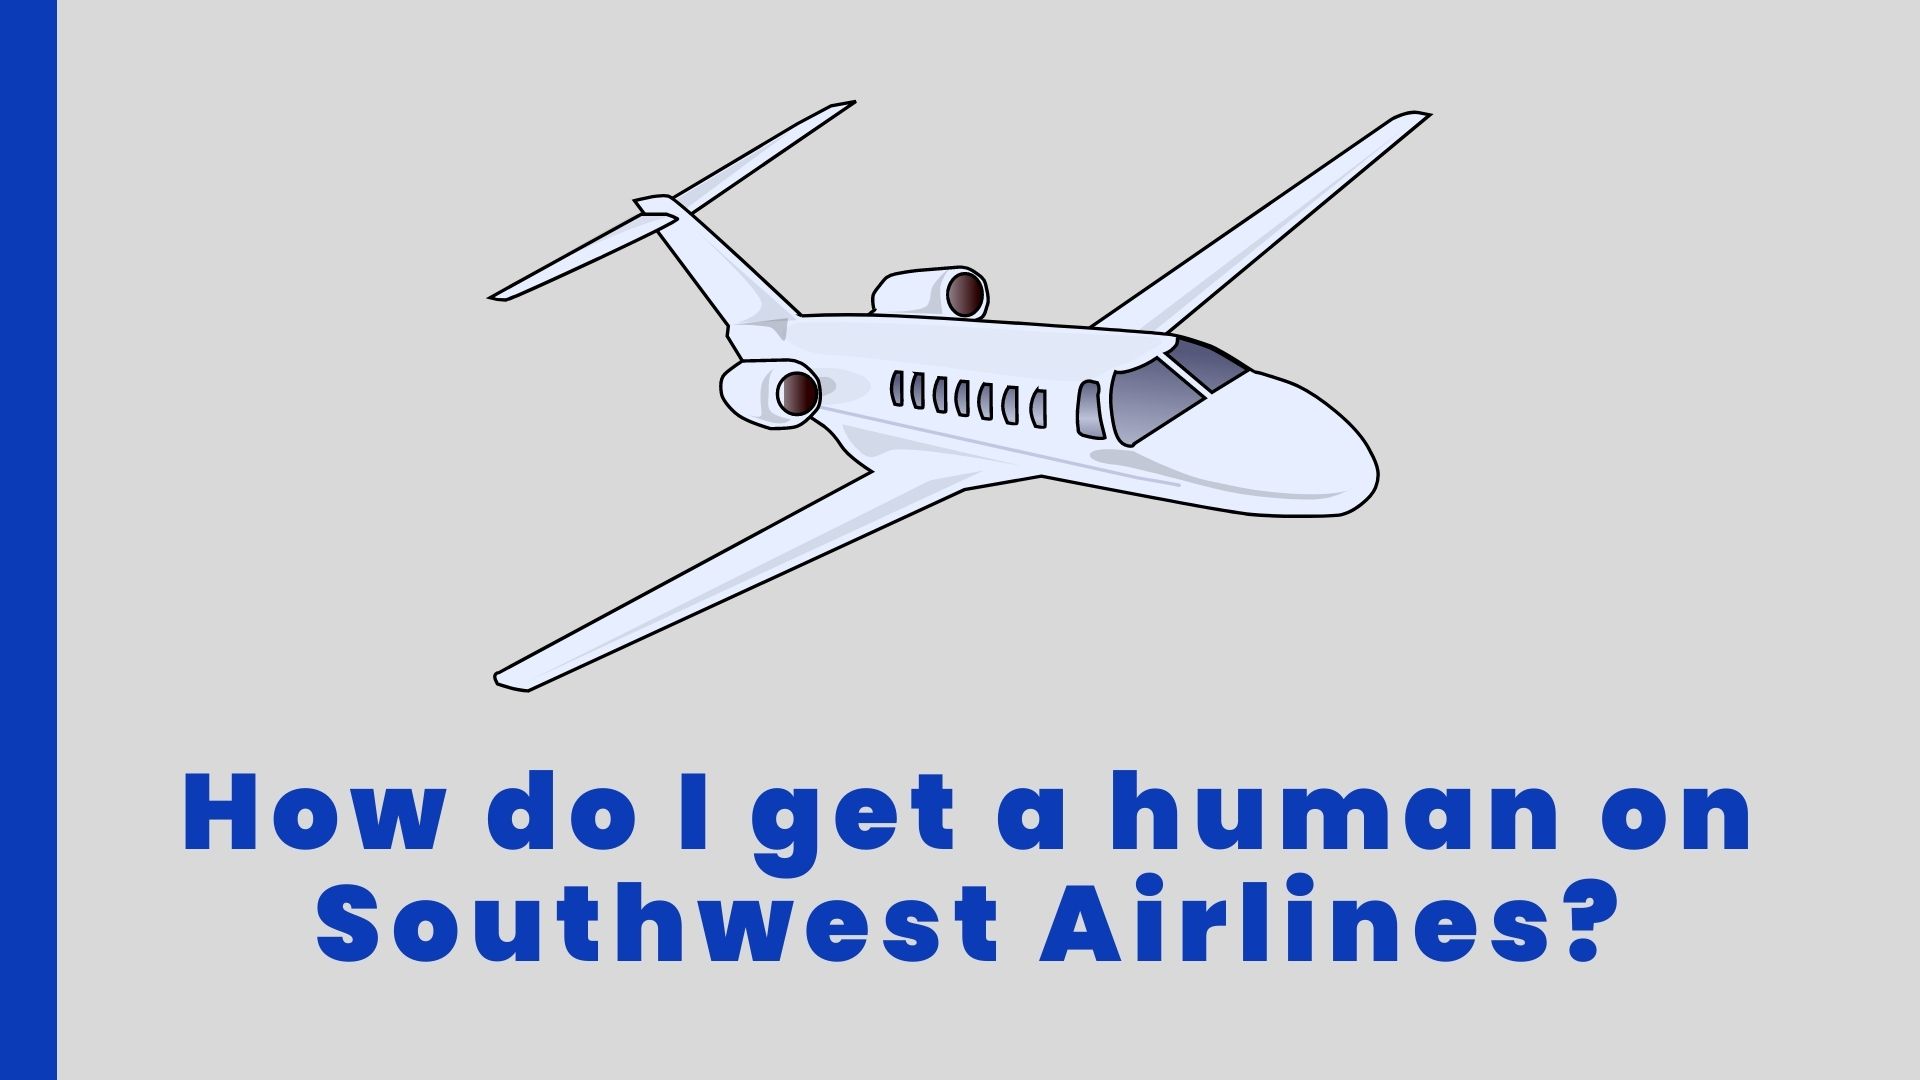 What is the fastest way to contact Southwest Airlines?